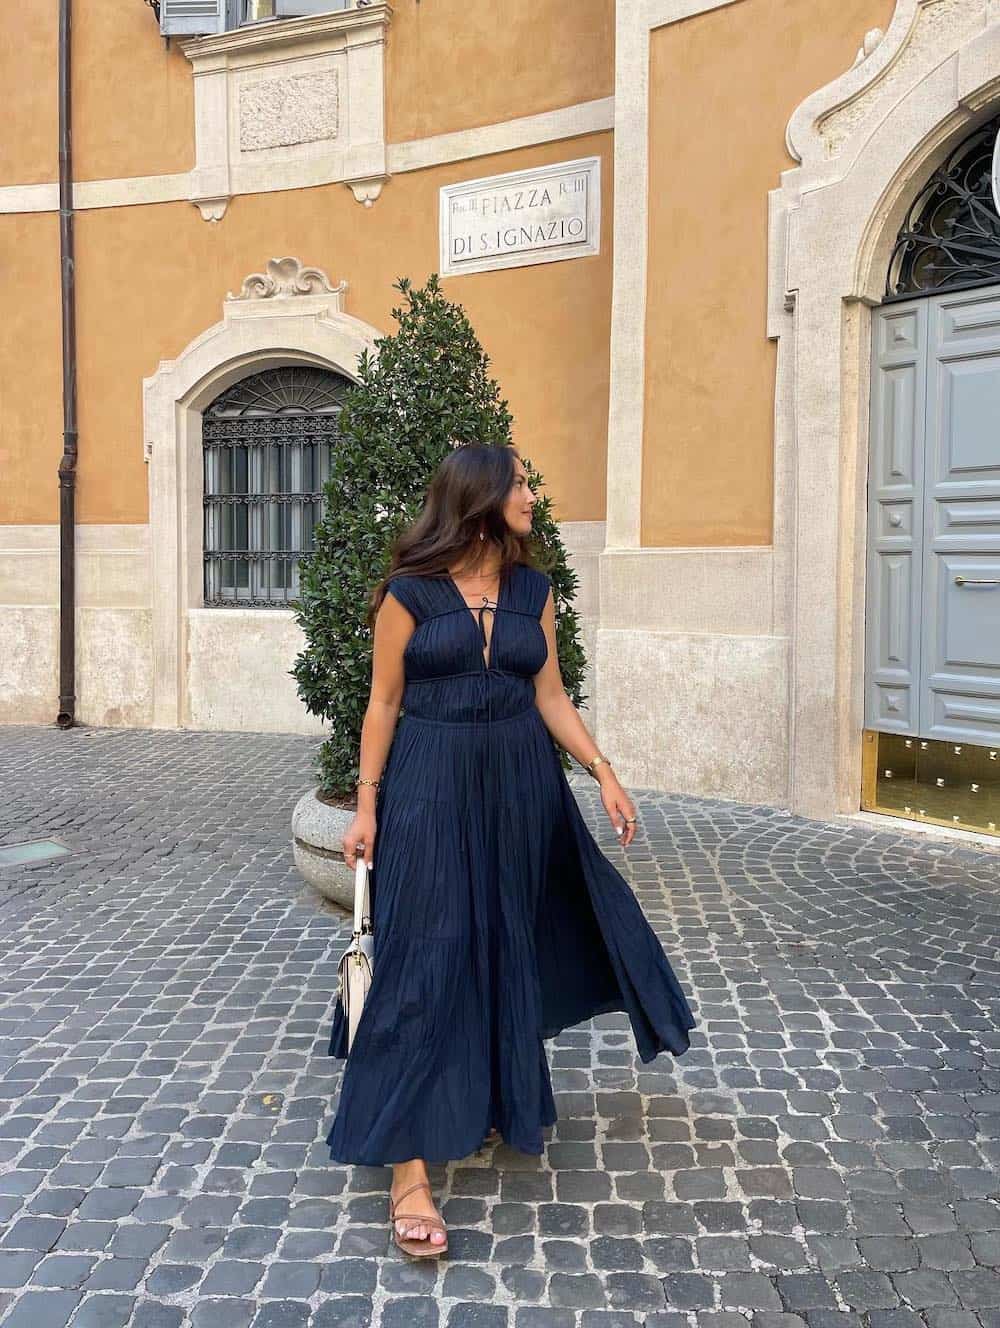 Woman wearing a navy blue maxi dress with brown sandals.